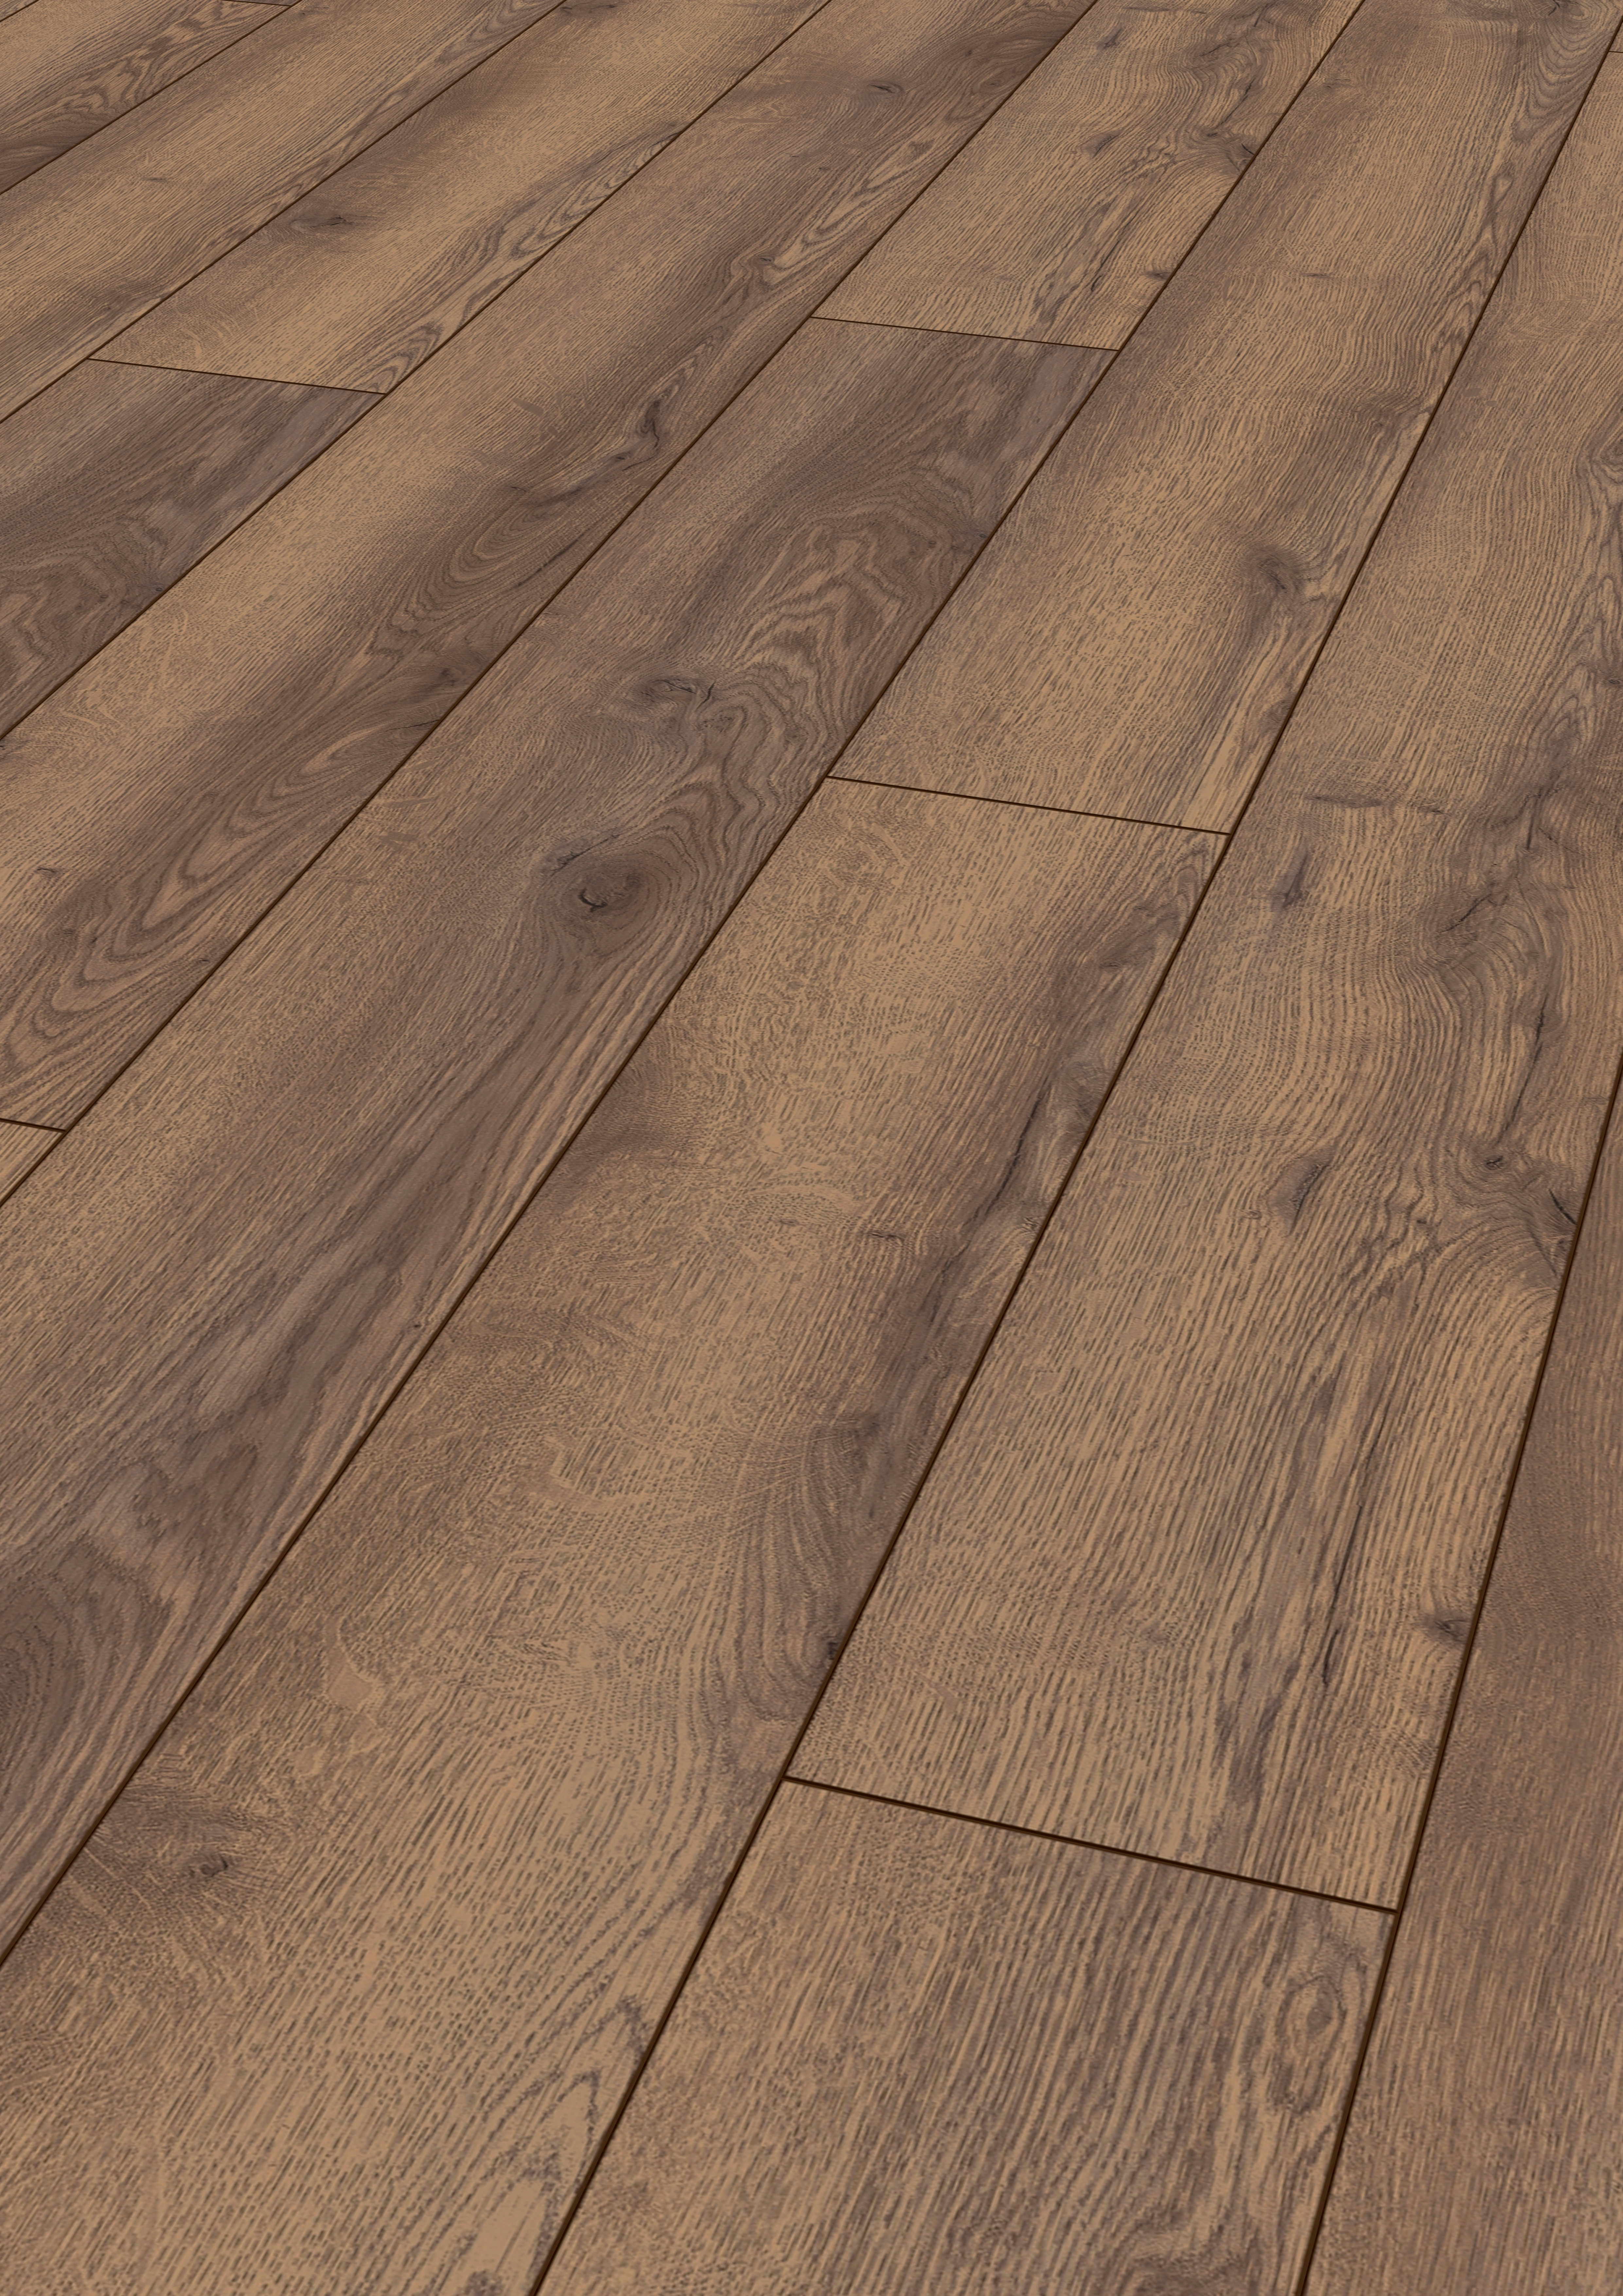 Cheap Hardwood Flooring Ottawa Of Mammut Laminate Flooring In Country House Plank Style Kronotex Intended for Download Picture Amp